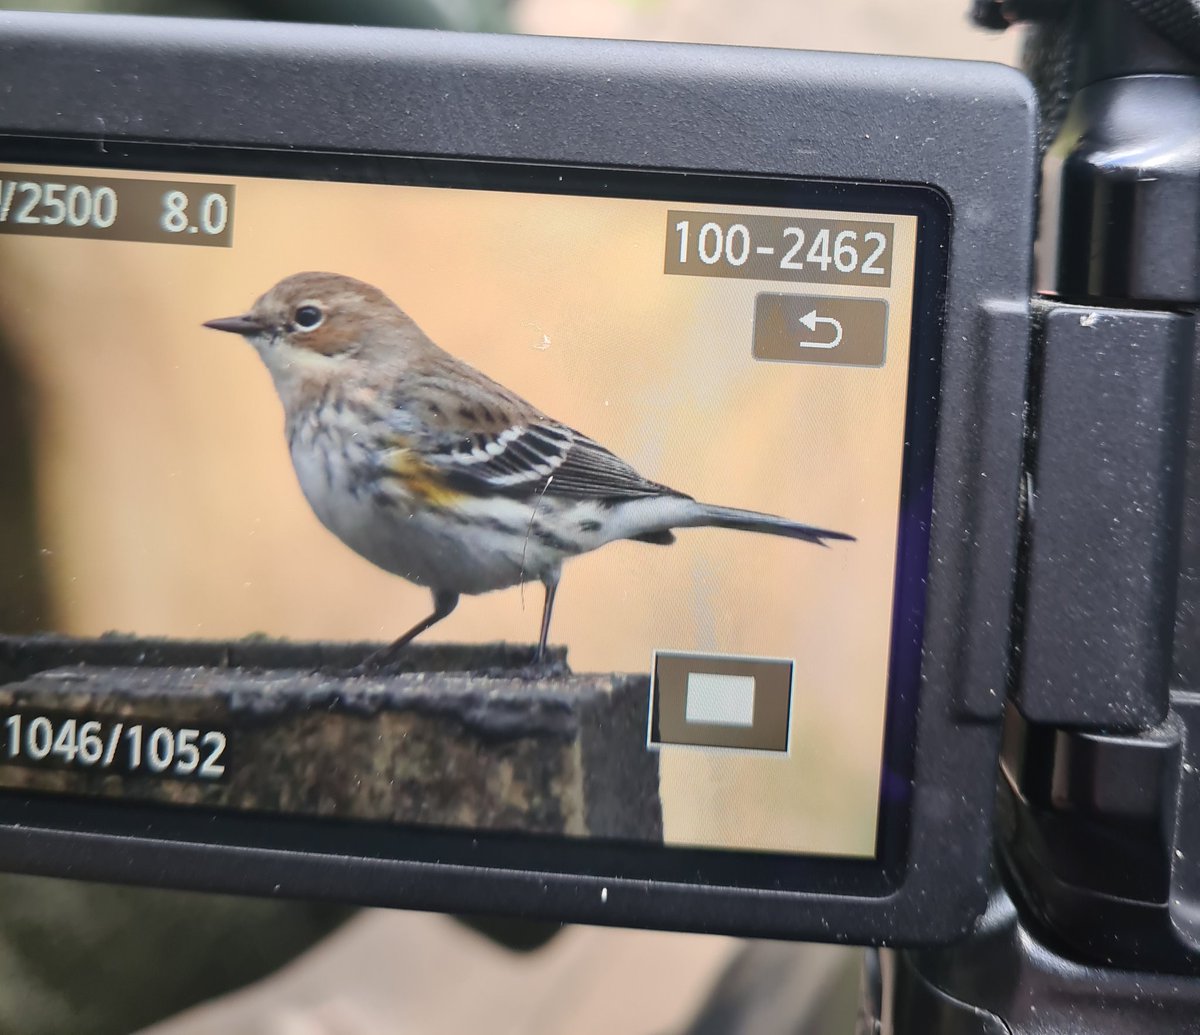 The tartan Rd to Kilwinning was paved with gold by a grappling view of the infamous Myrtle Warbler. With @rickyflesher and a certain Watford fan who shouldn't have been here (shush no names)